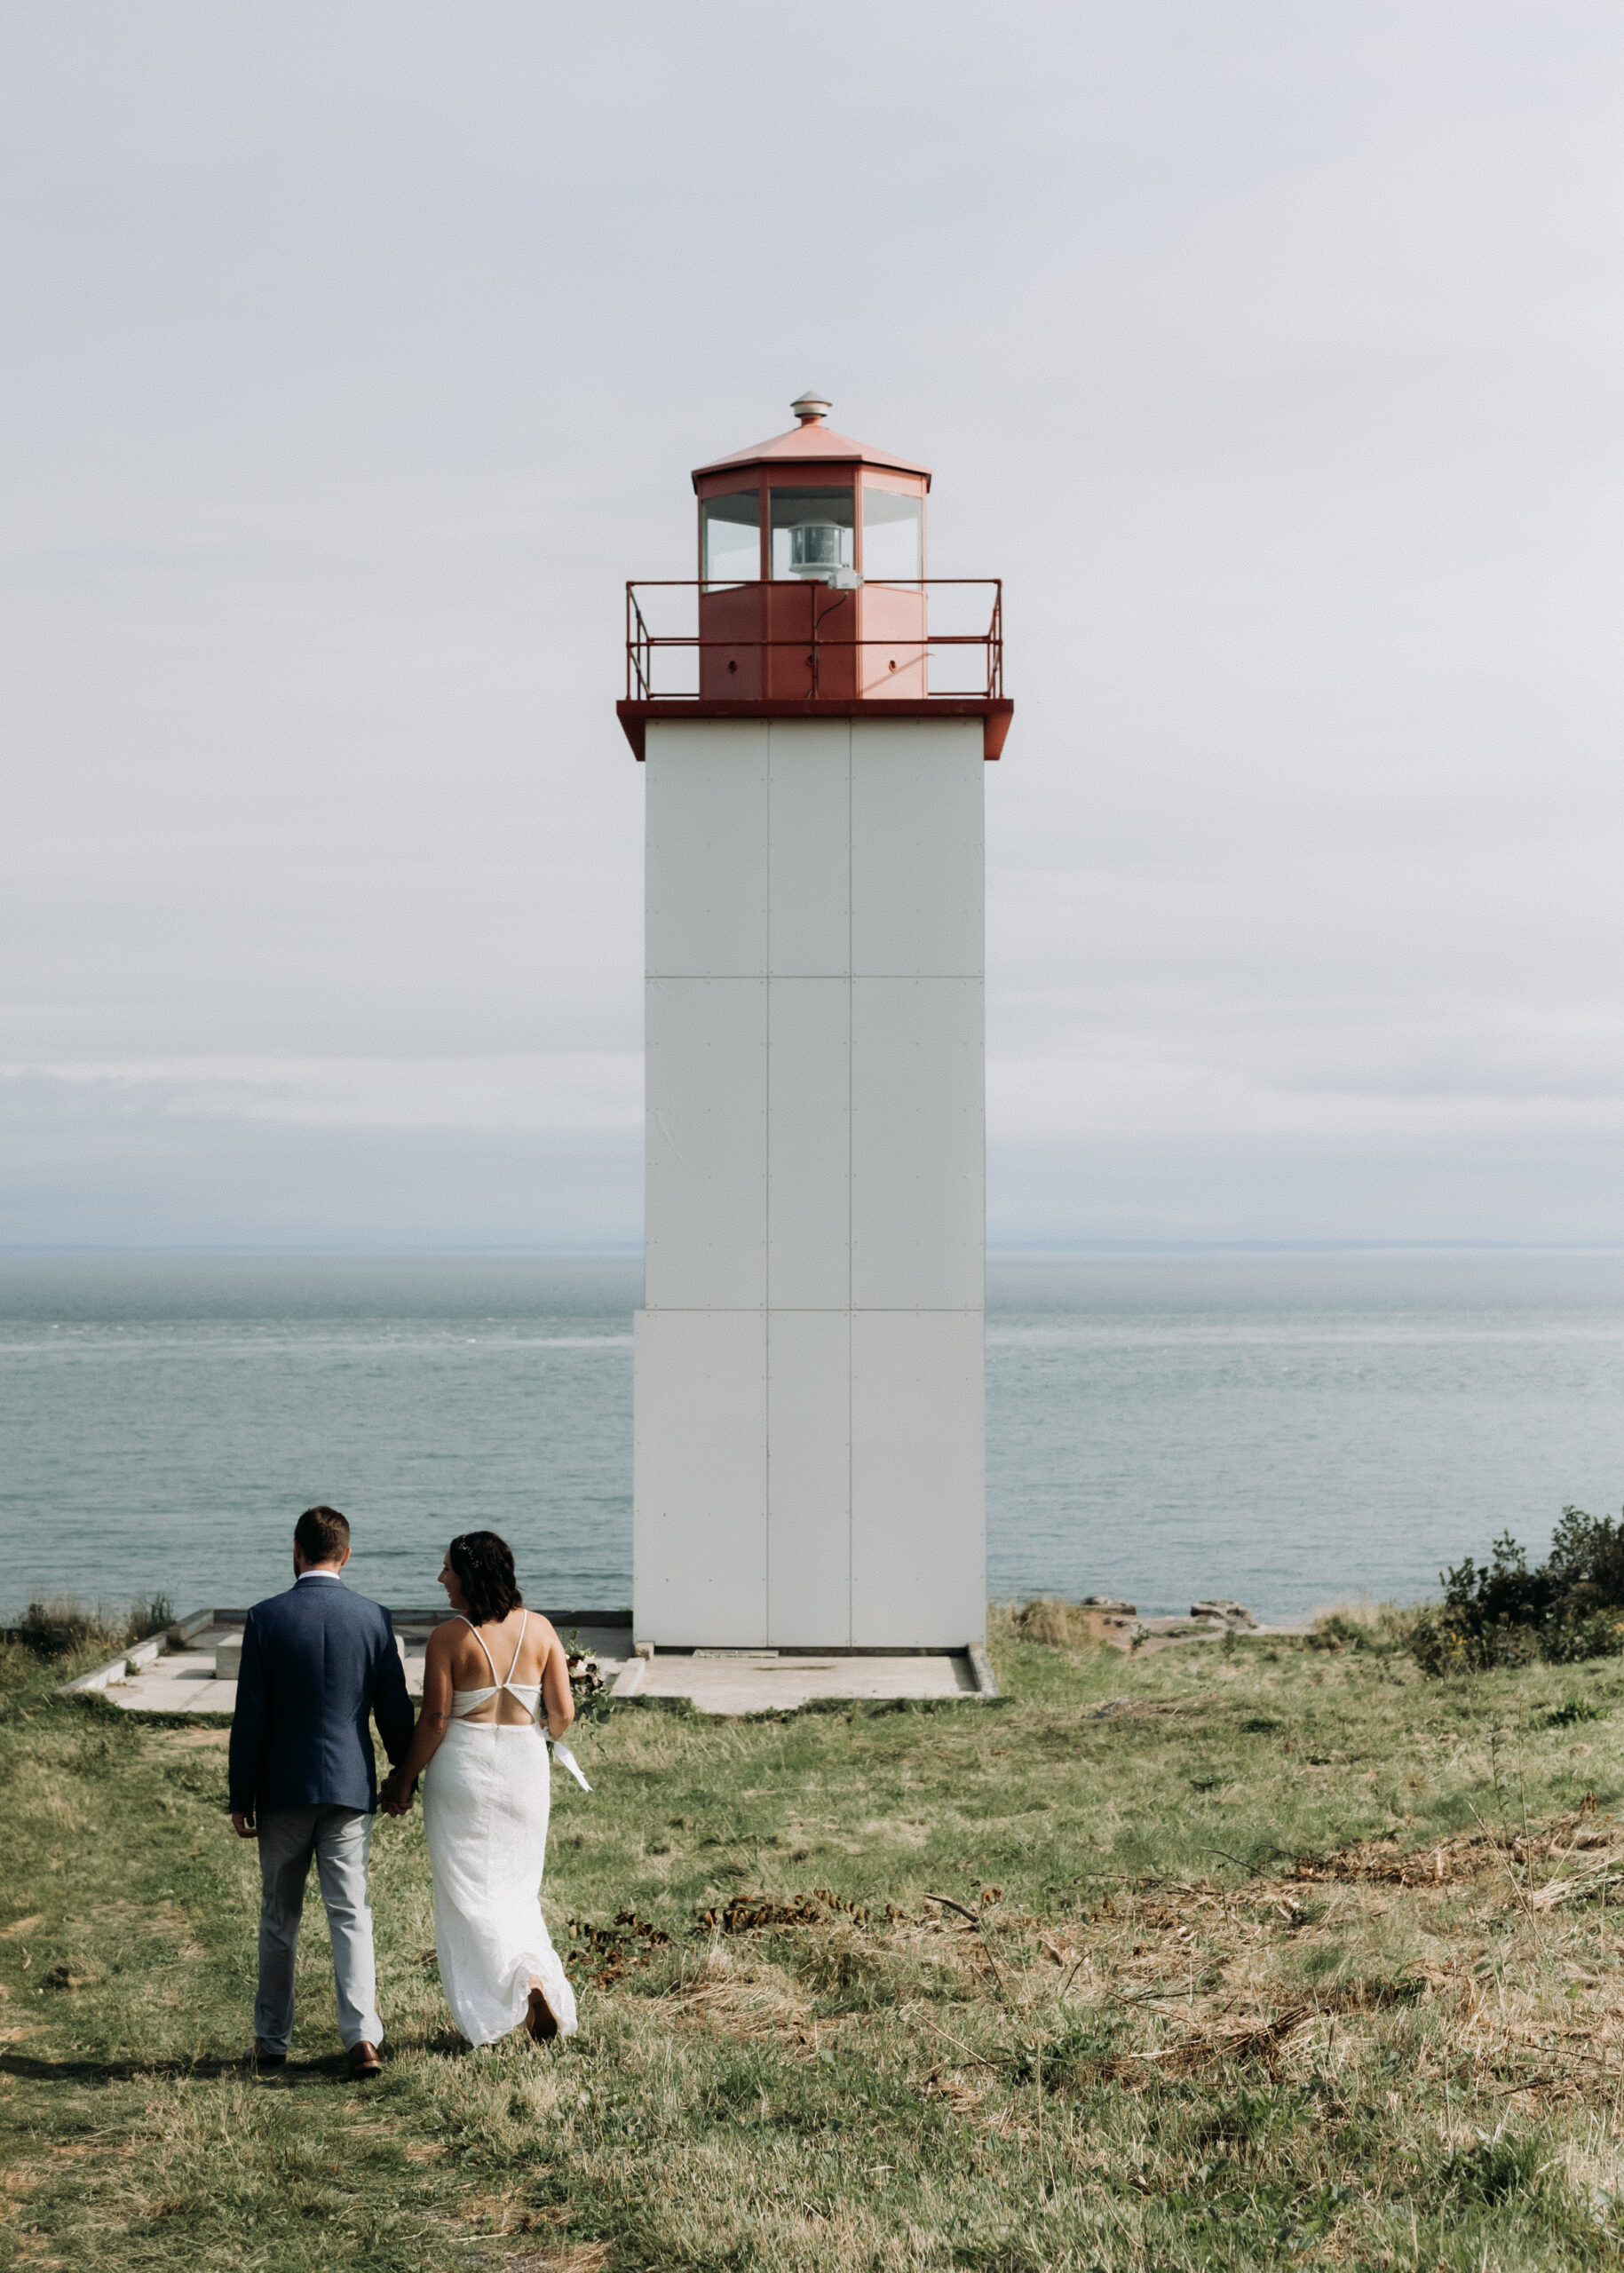 a couple has chosen to elope in New Brunswick. Together they walk hand in hand towards a lighthouse overlooking the ocean where they will exchange vows.